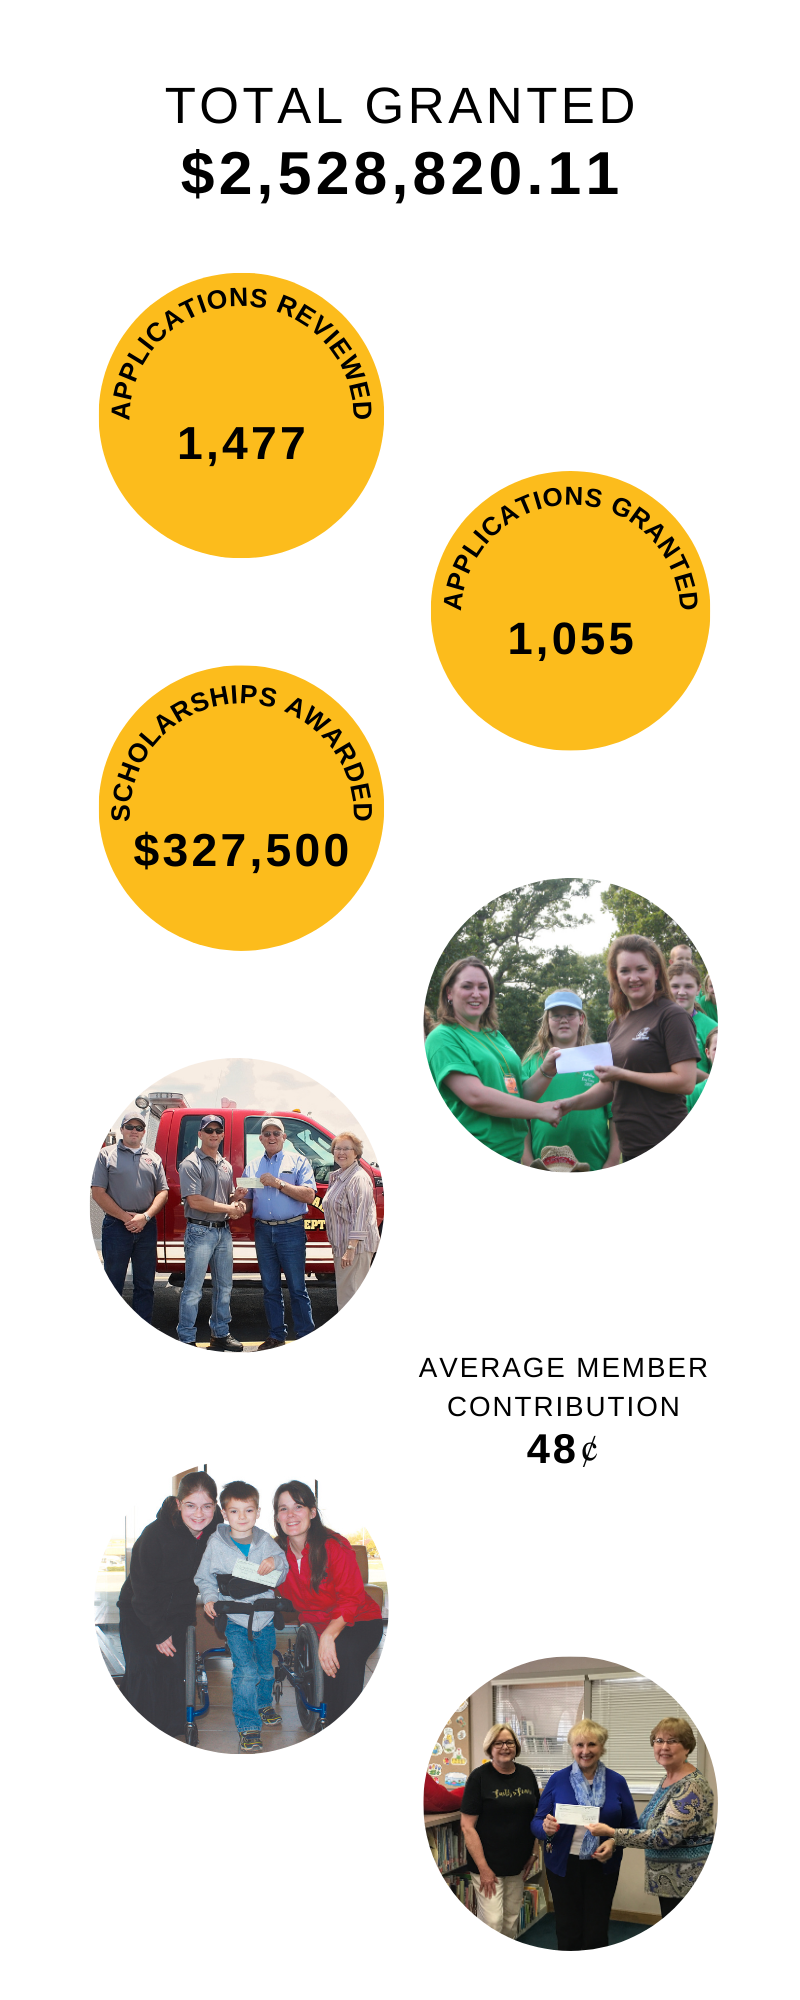 Total Granted: $2,528,820.11.  Applications Reviewed: 1,477. Applications Granted: 1,055. Scholarships Awarded: $327,500. Average Member Contribution: 48 cents.